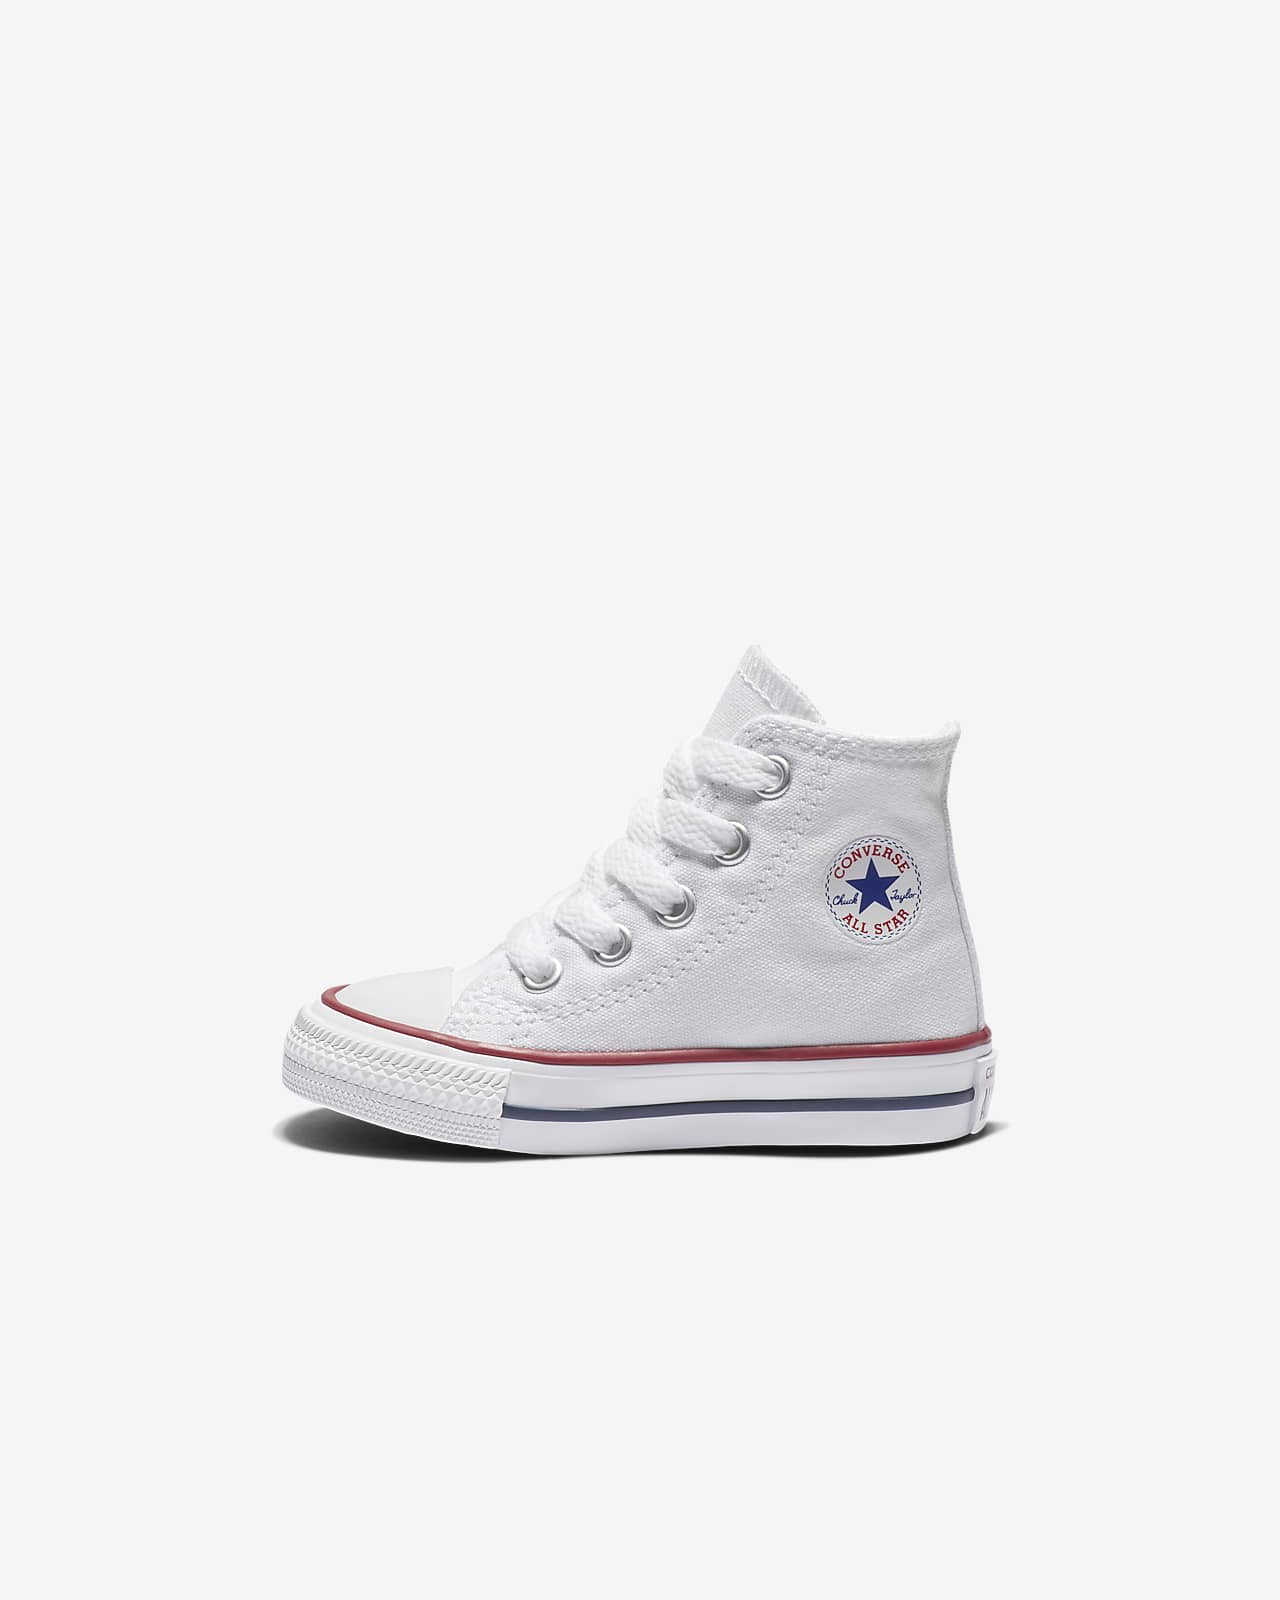 Converse Chuck Taylor All Star High Top (2c-10c) Infant/Toddler ...